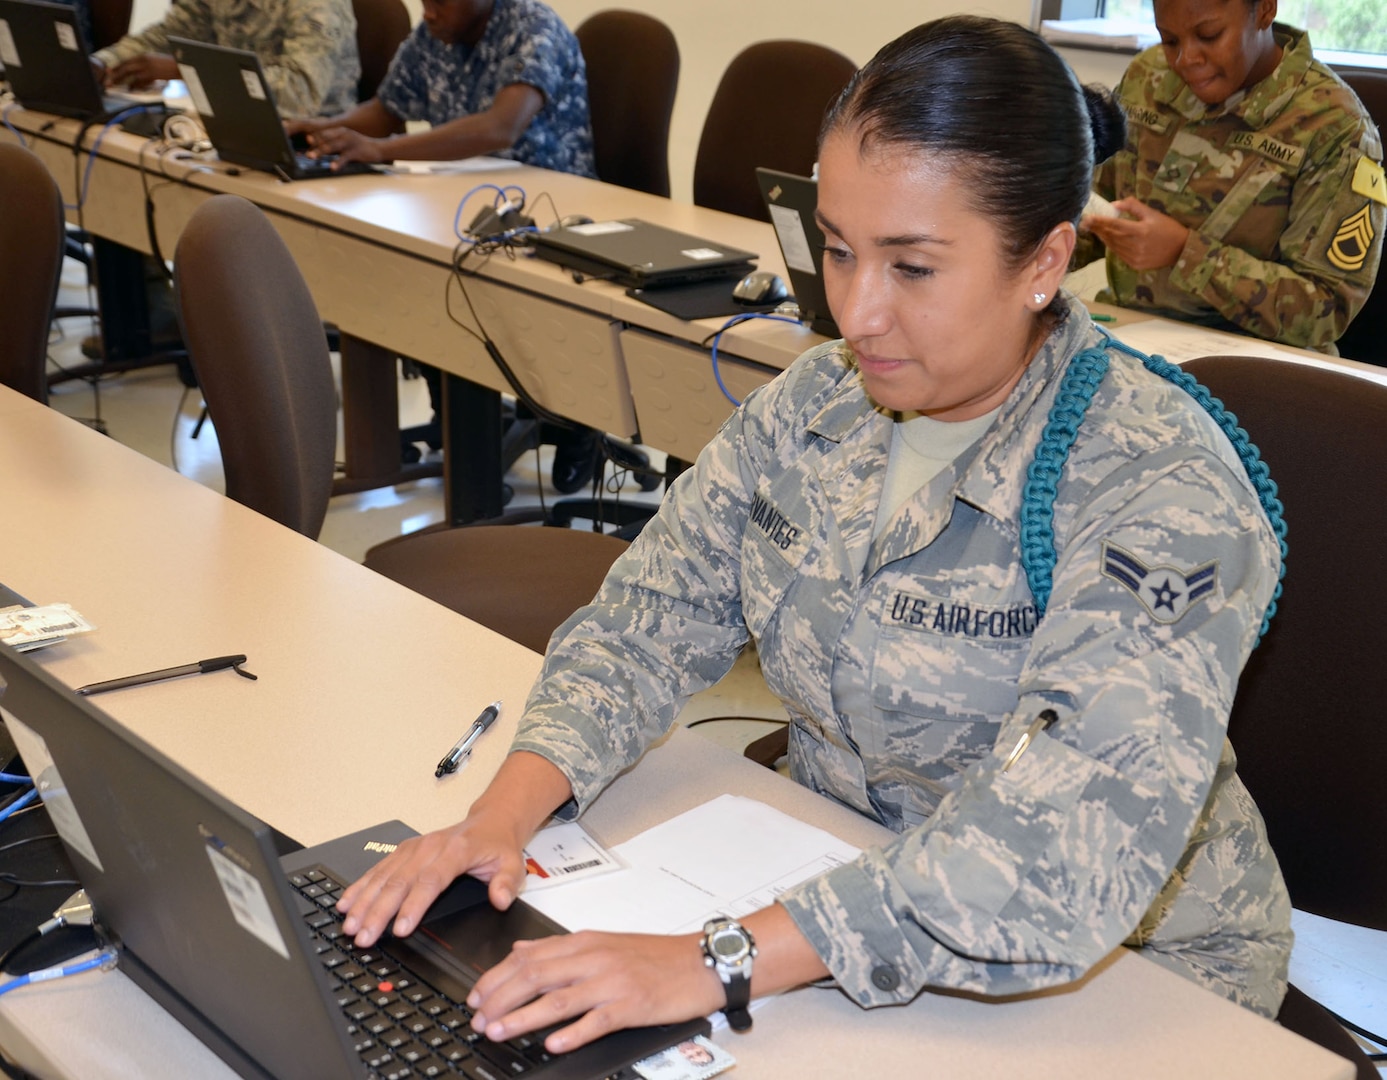 Airman 1st Class Amanda Cervantes, a student in the Medical Education and Training Campus Pharmacy Technician program on Joint Base San Antonio-Fort Sam Houston, Texas, conducts a mock exam to learn how to use the Composite Health Care System database. "Mock" exams test the skills that the students have learned to prepare them not only for the graded exam, but for what they will see in the clinical training phase and eventually in their permanent duty station.  Cervantes, a widow with four children, joined the Air Force Reserve to set an example for her children, serve her country, and work in the medical field so she can help people.